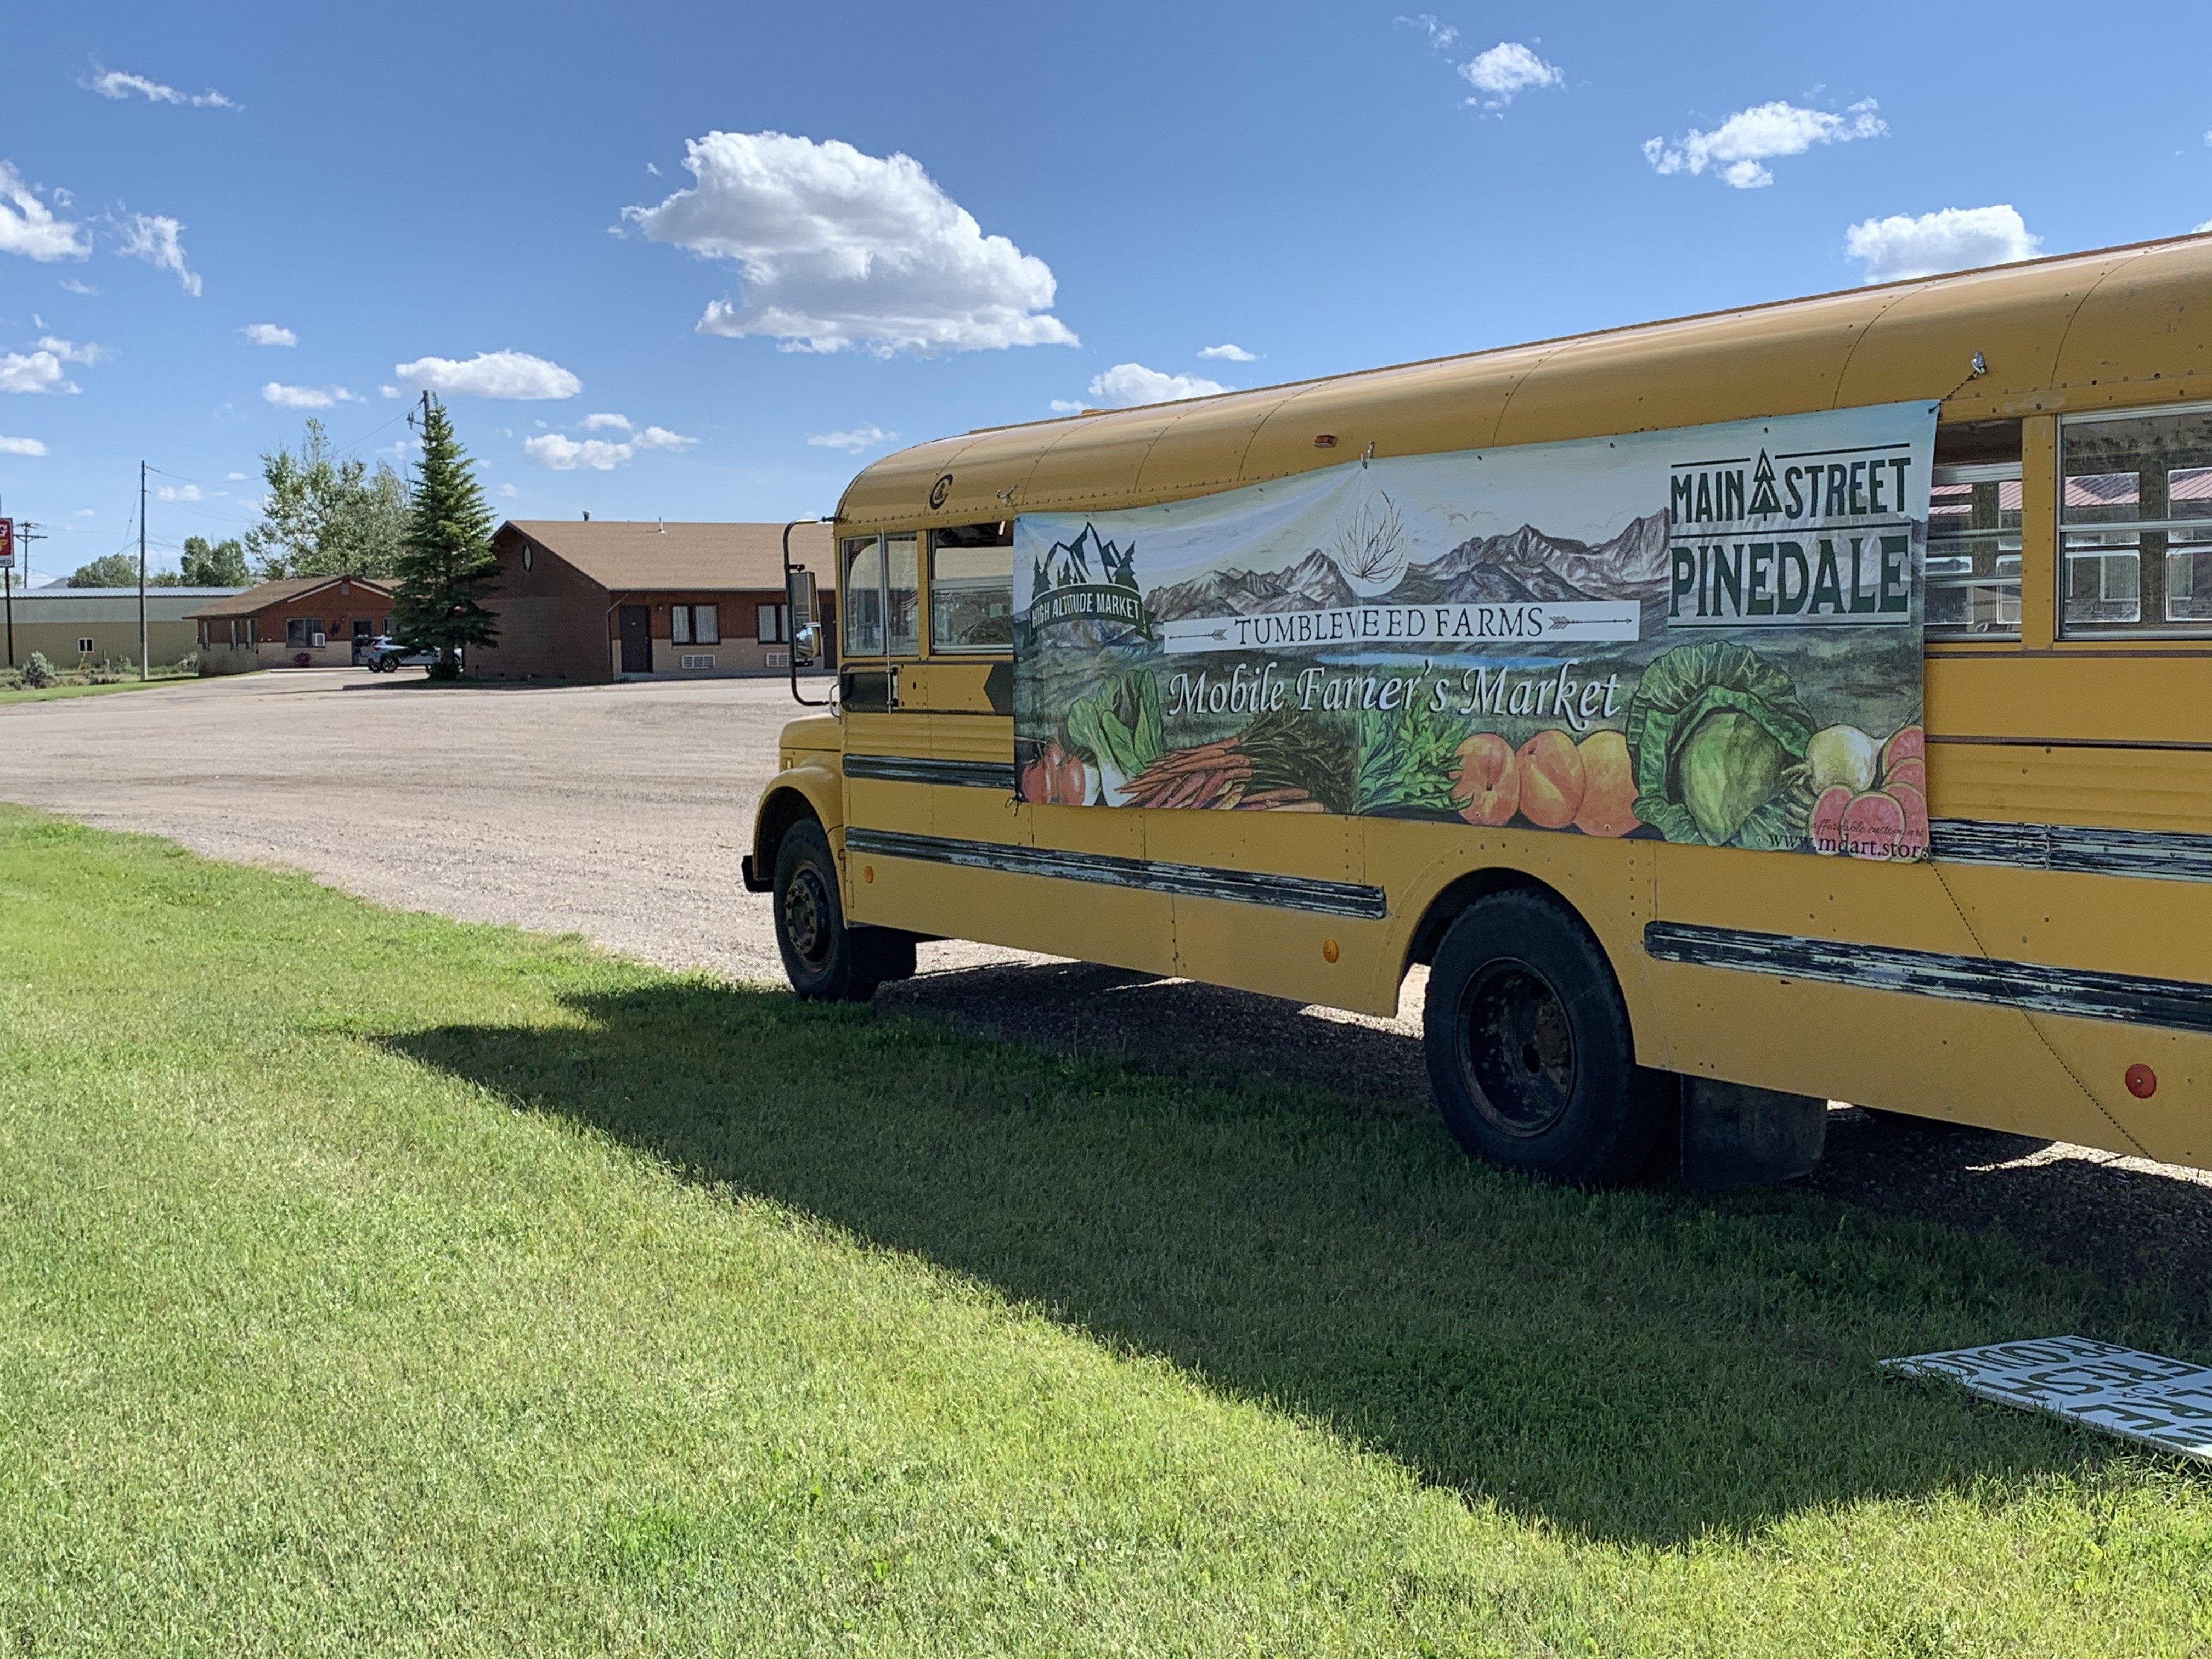 Previous Happening: Farm Happenings for July 9, 2020